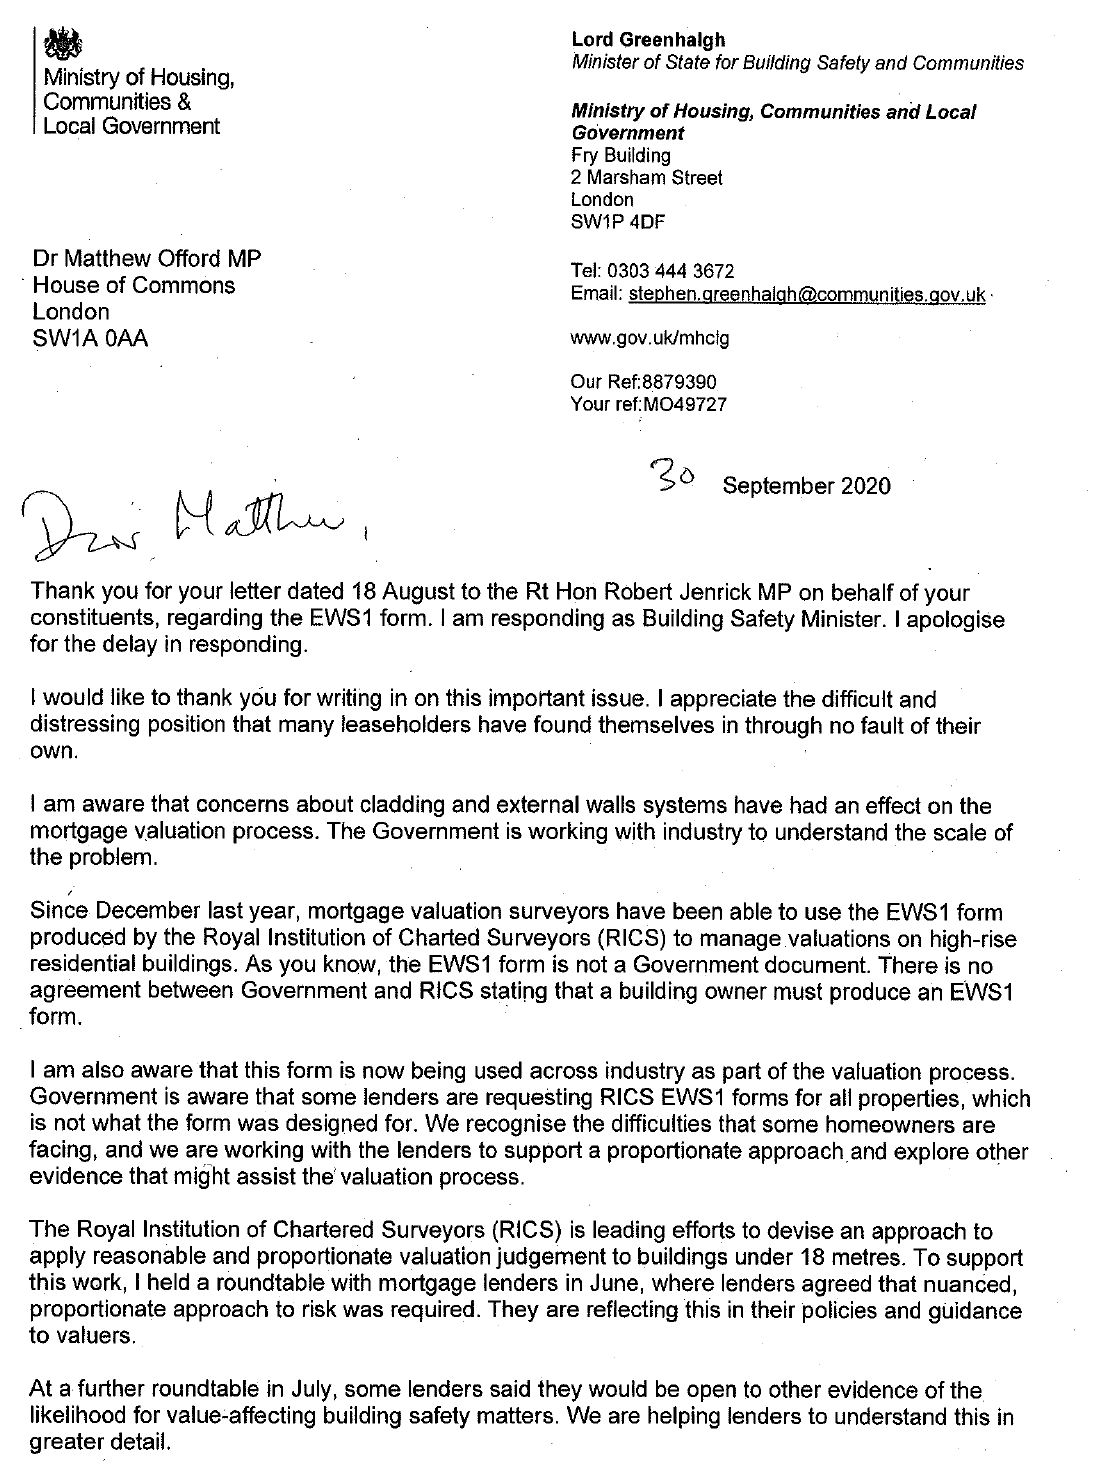 Lord Greenhalgh letter